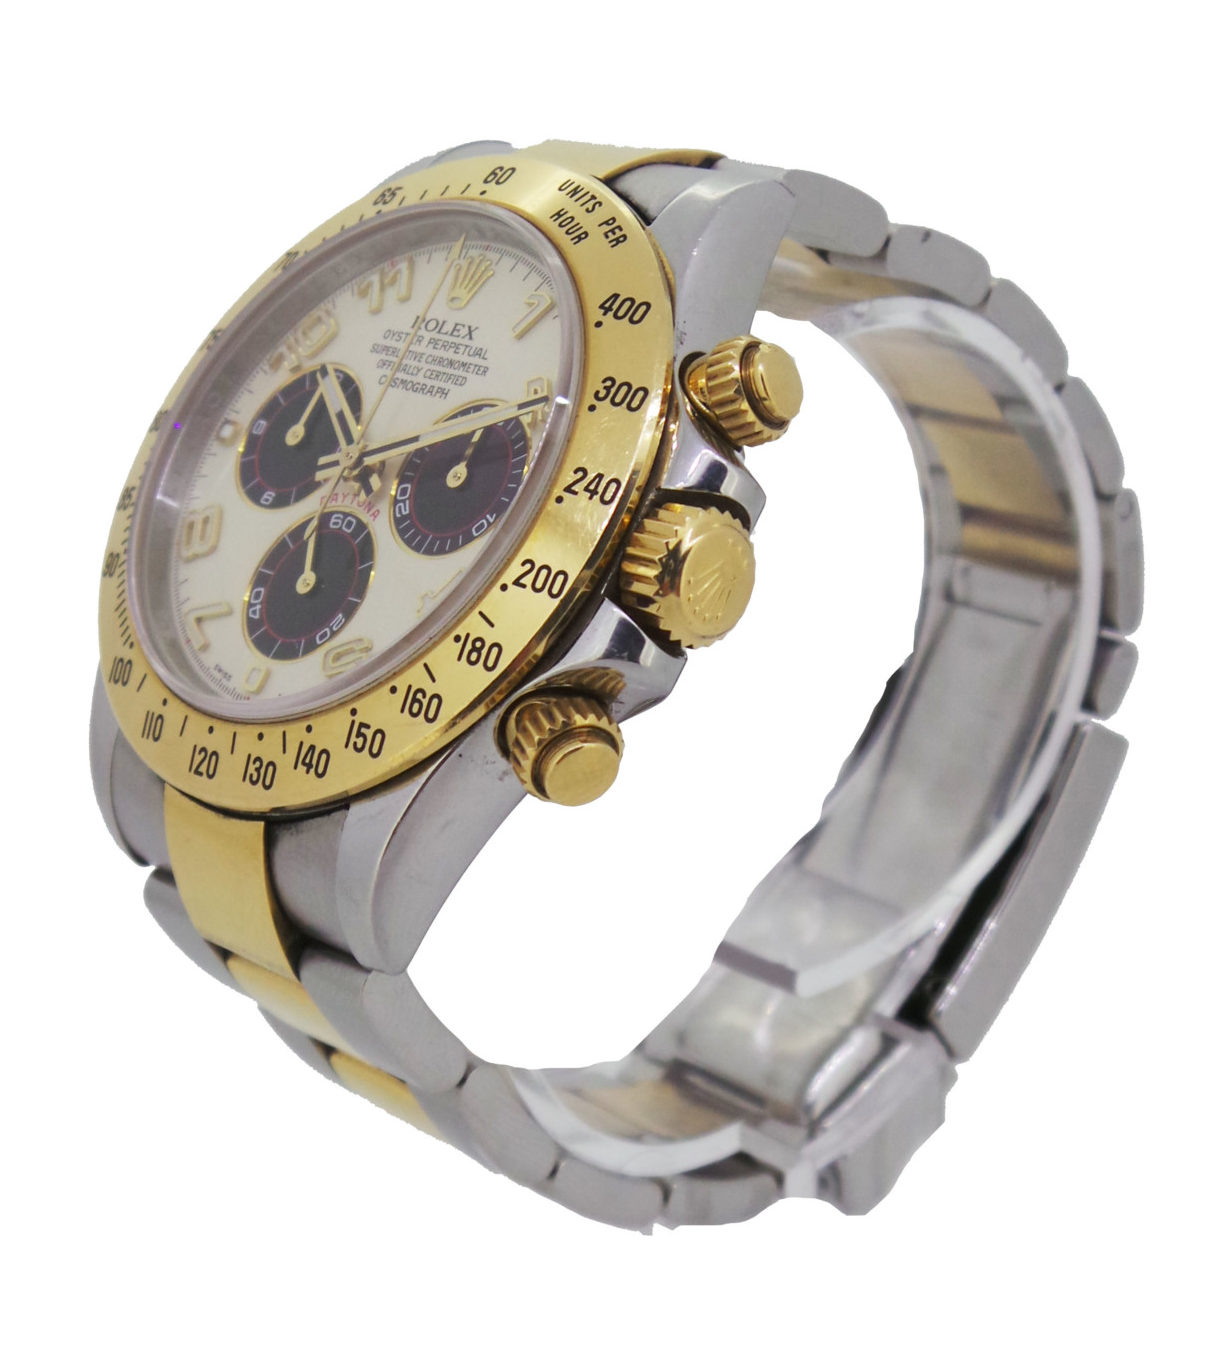 Rolex model: daytona cosmograph model number: 116523 movement type: automatic bracelet: bi-colour case: steel with gold bezel dial: cream with black sub dials bezel size: 40mm box: no papers:no estimated nrp: £11,500. 00.